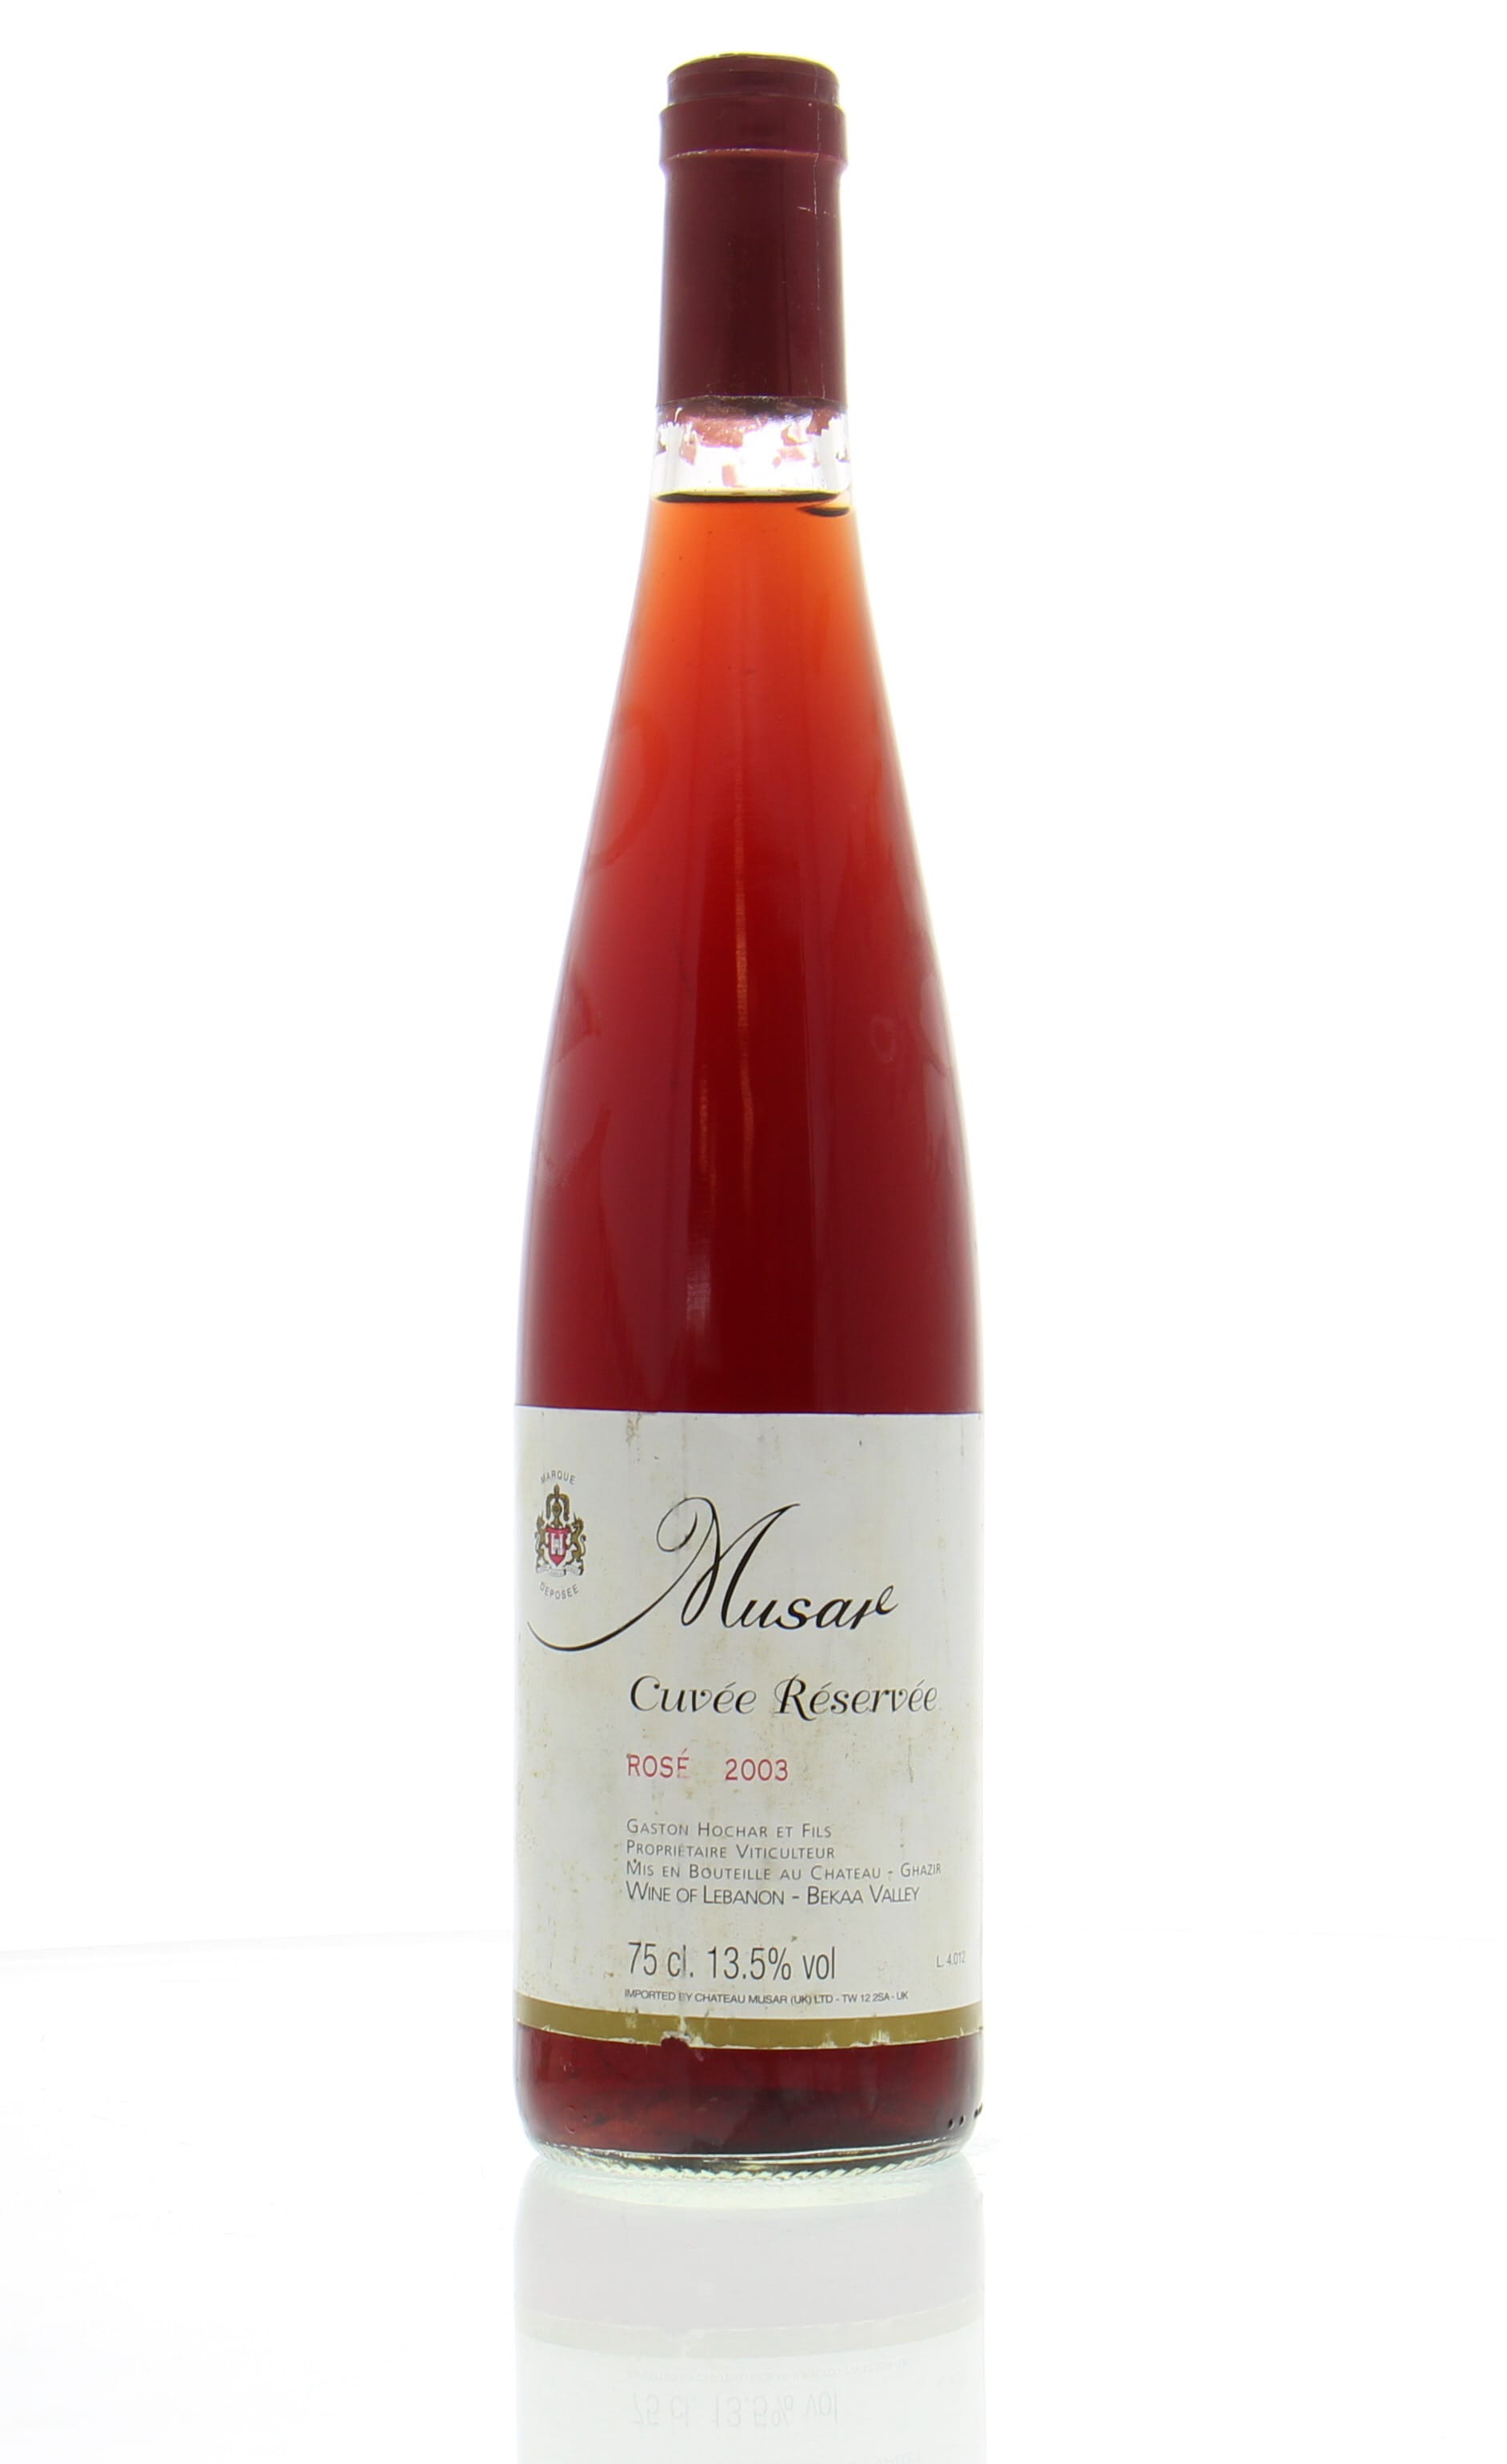 Chateau Musar - Cuvee Reservee Rose 2003 Perfect